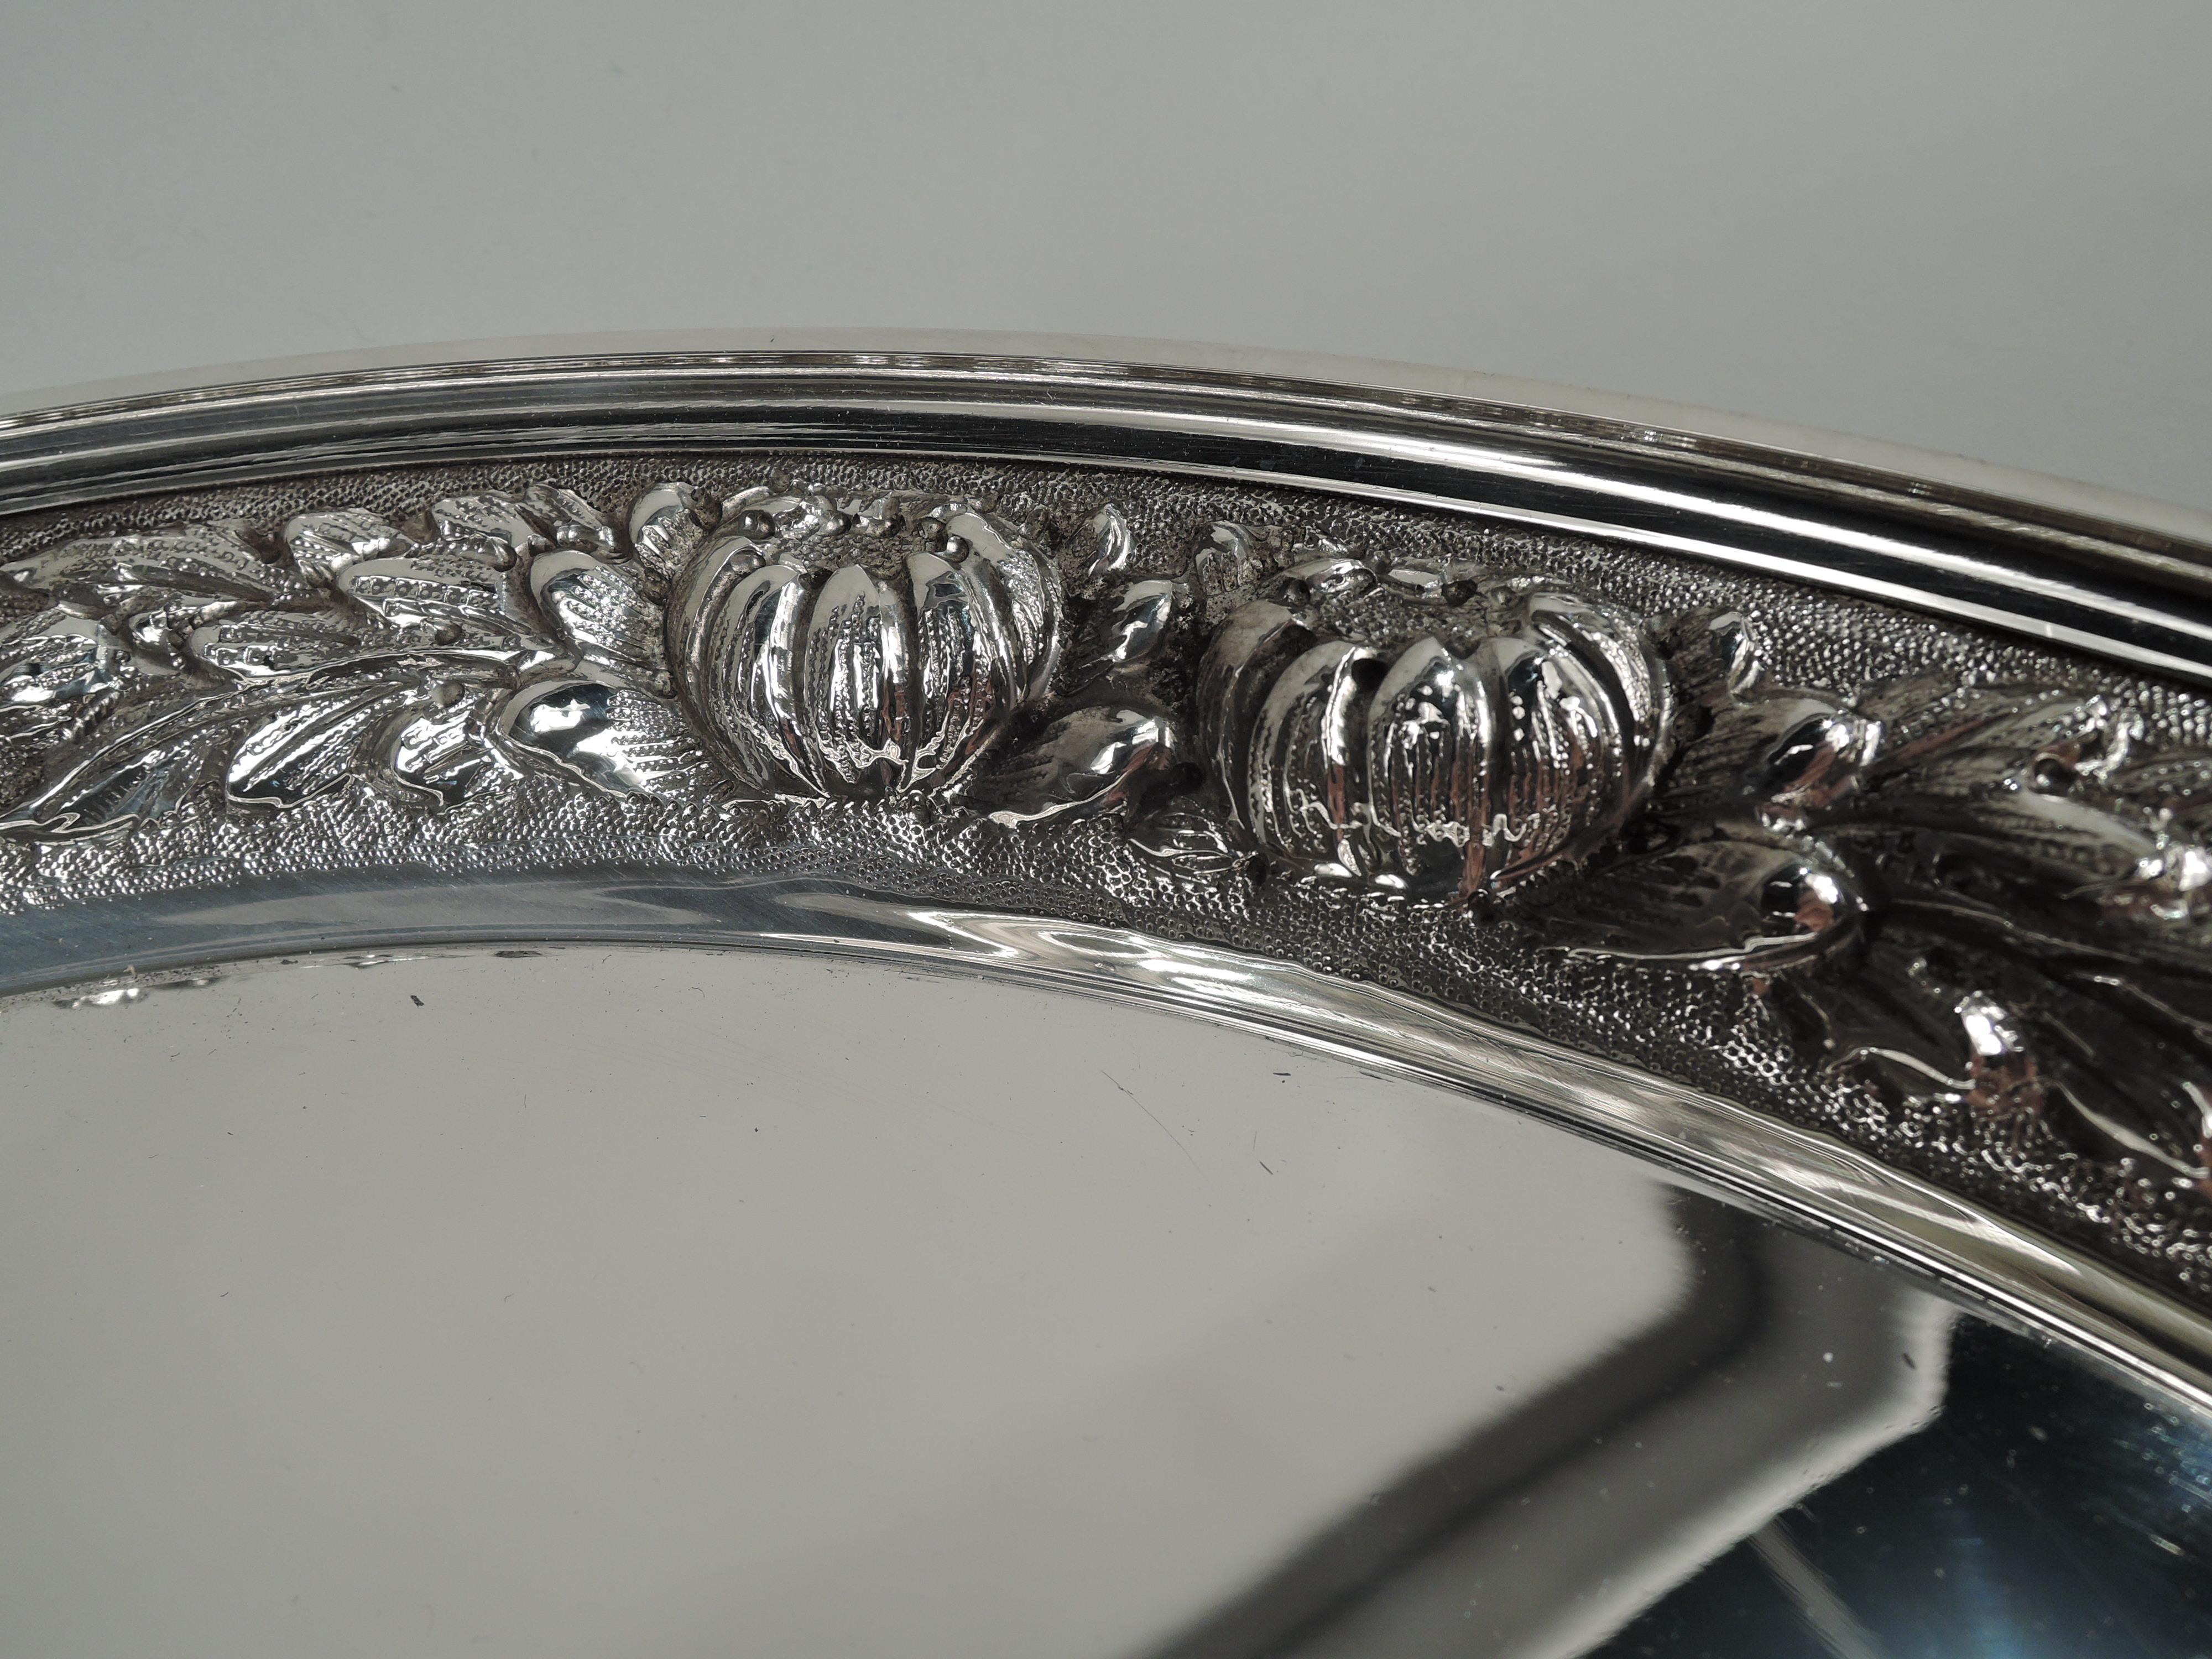 Traditional sterling silver tray. Made by Stieff in Baltimore in 1956. Round and plain well and flat rim. Shoulder tapering with repousse floral garland on stippled ground. A nice piece in a regional style. Fully marked including maker’s stamp, date